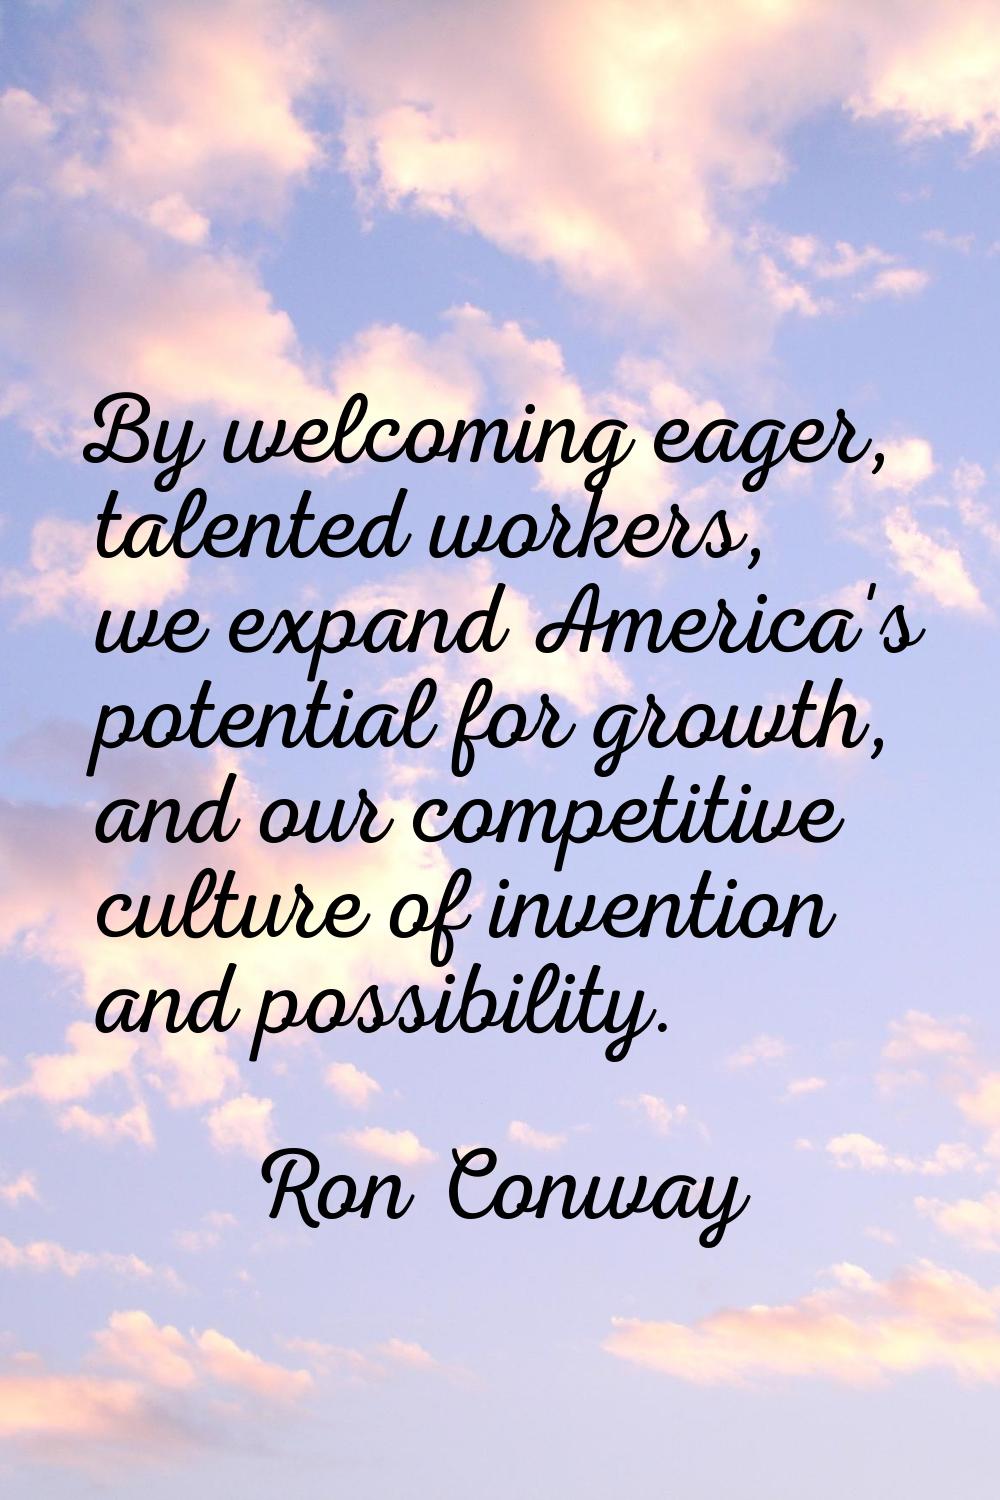 By welcoming eager, talented workers, we expand America's potential for growth, and our competitive